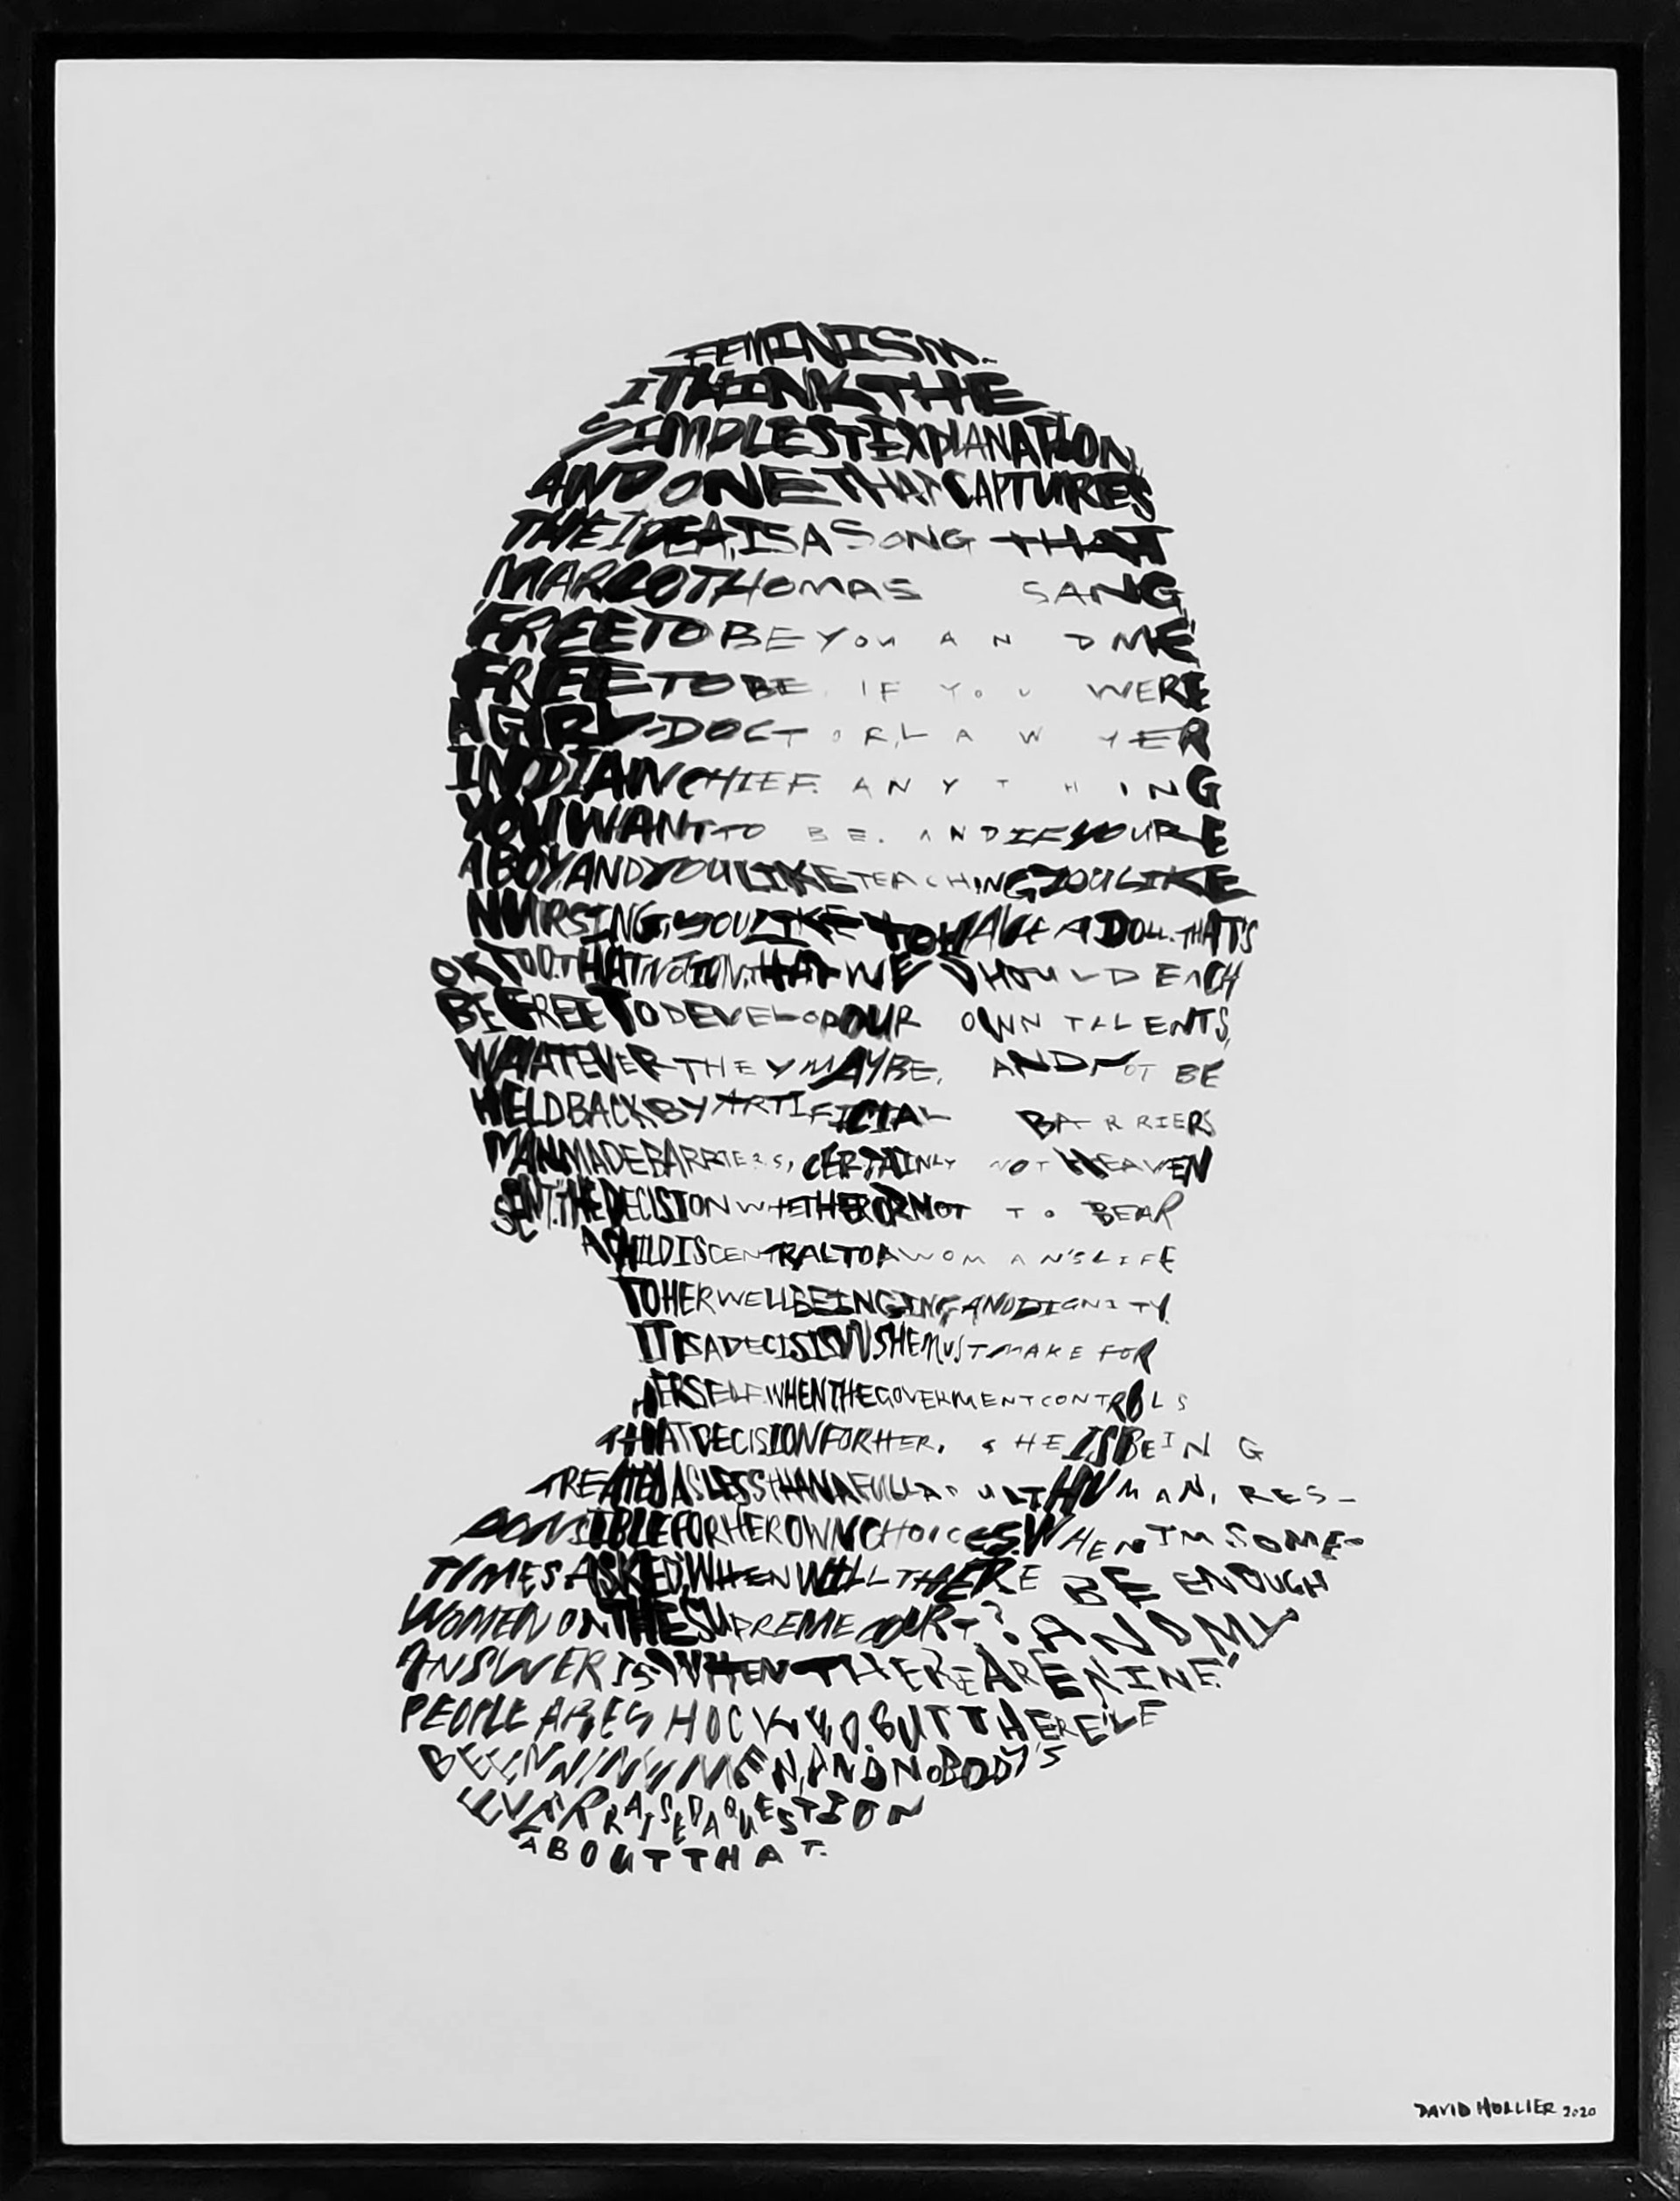 Ruth Bader Ginsberg (Text: My Own Words) by David Hollier